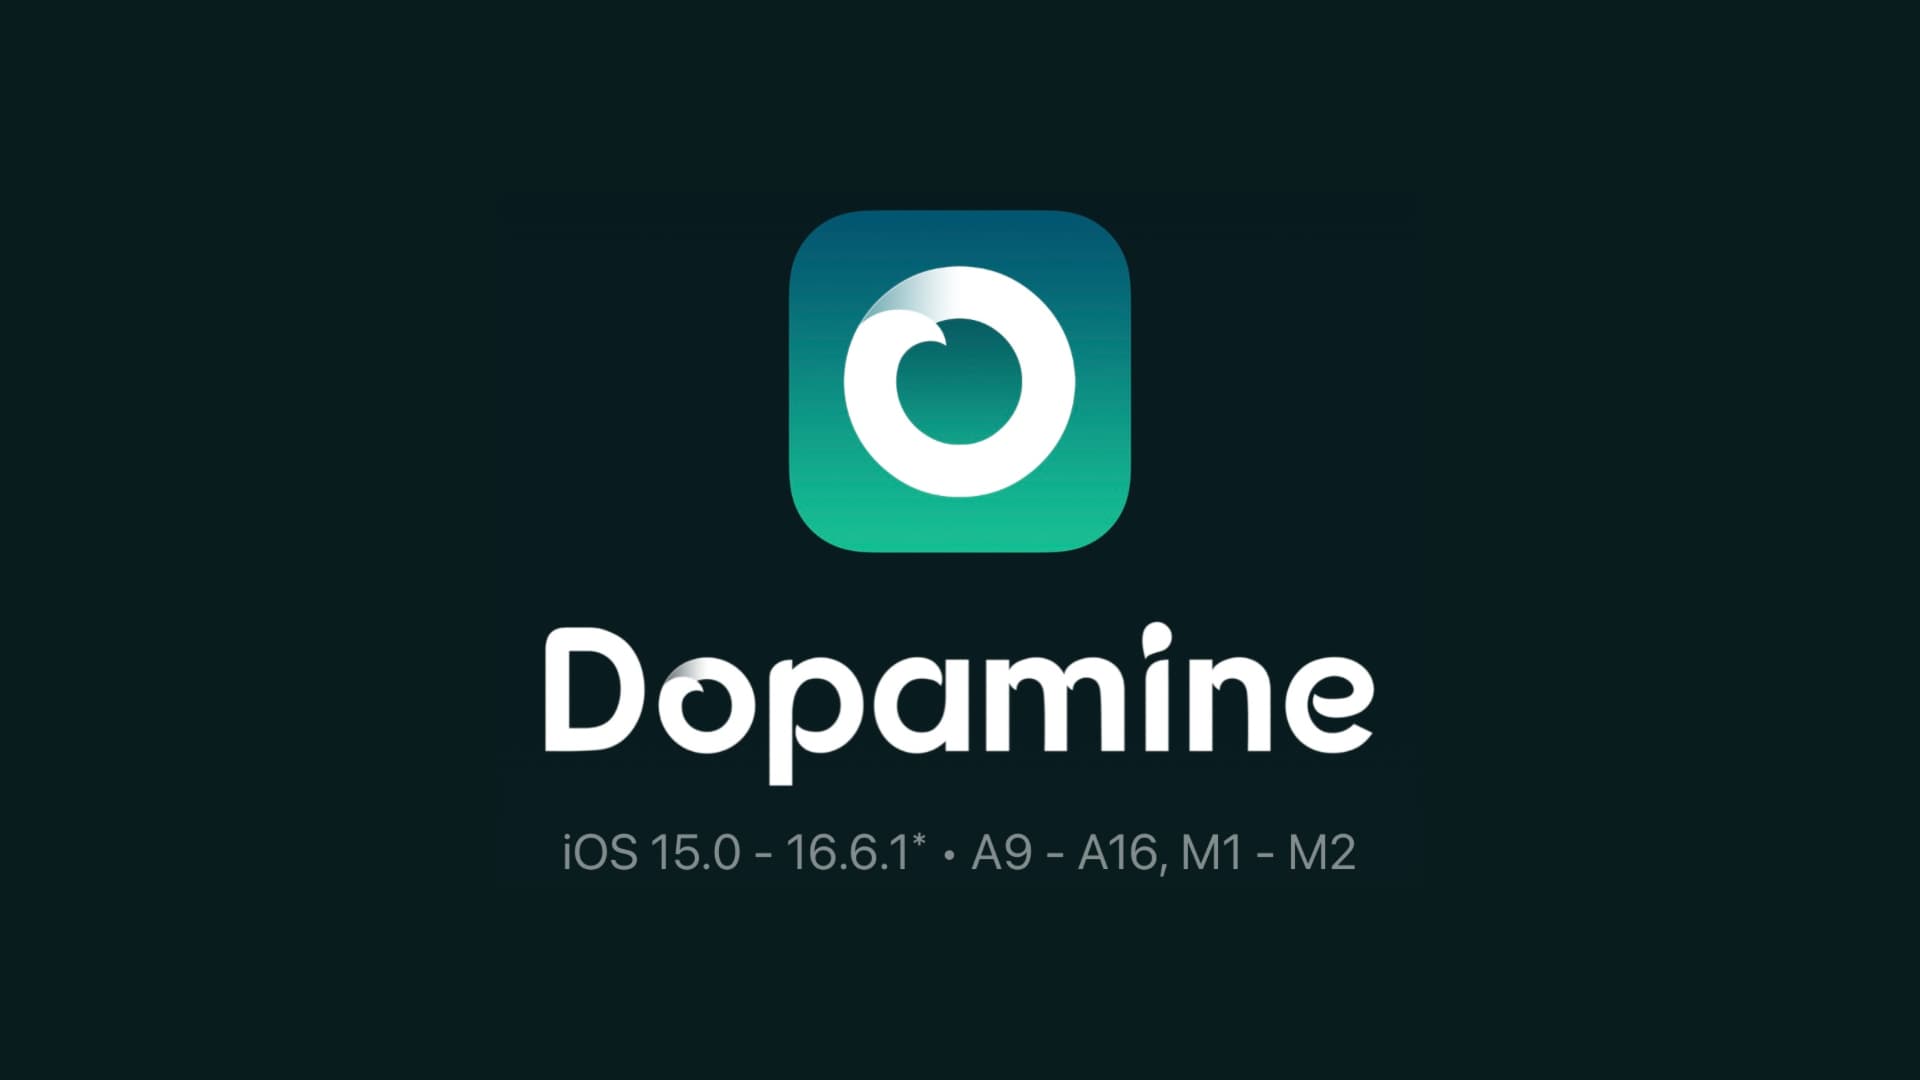 Dopamine v2.0.4 update to new jailbreak fixes issue with libkrw not working correctly